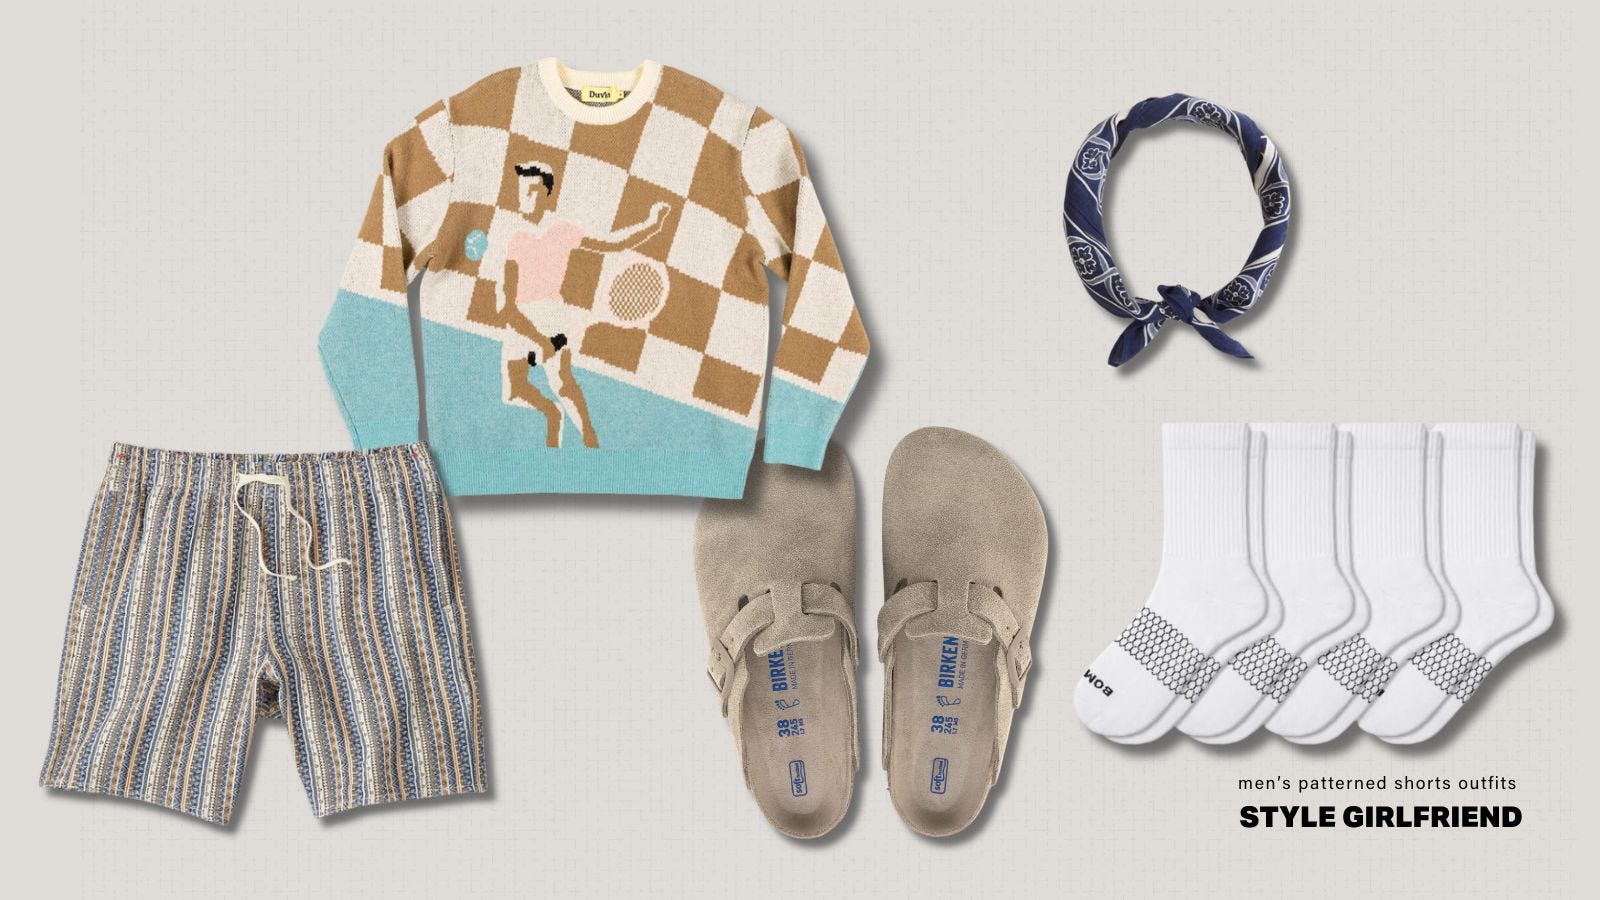 Men's casual outfit including patterned shorts, tennis themed sweater, Birkenstock clogs and high white socks